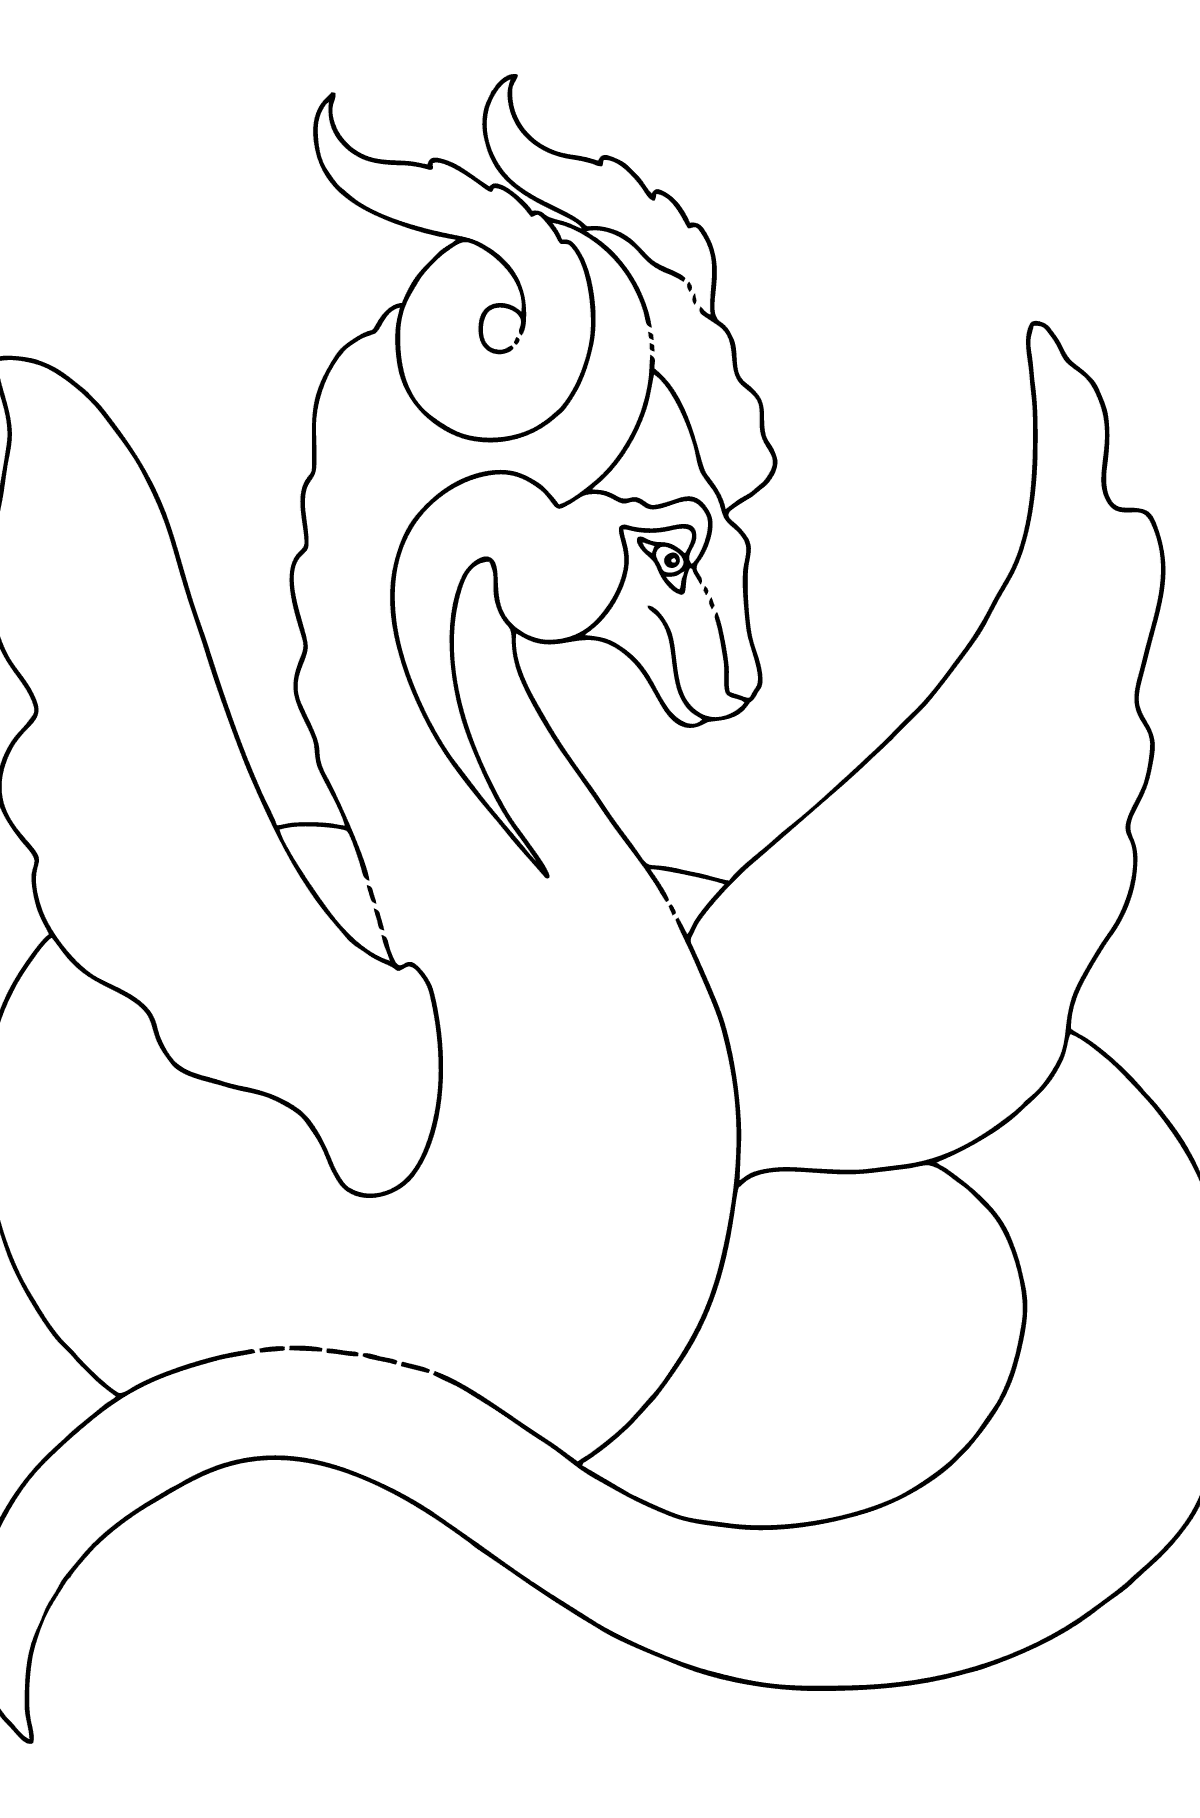 Wonderful Dragon Coloring page (simple) - Coloring Pages for Kids